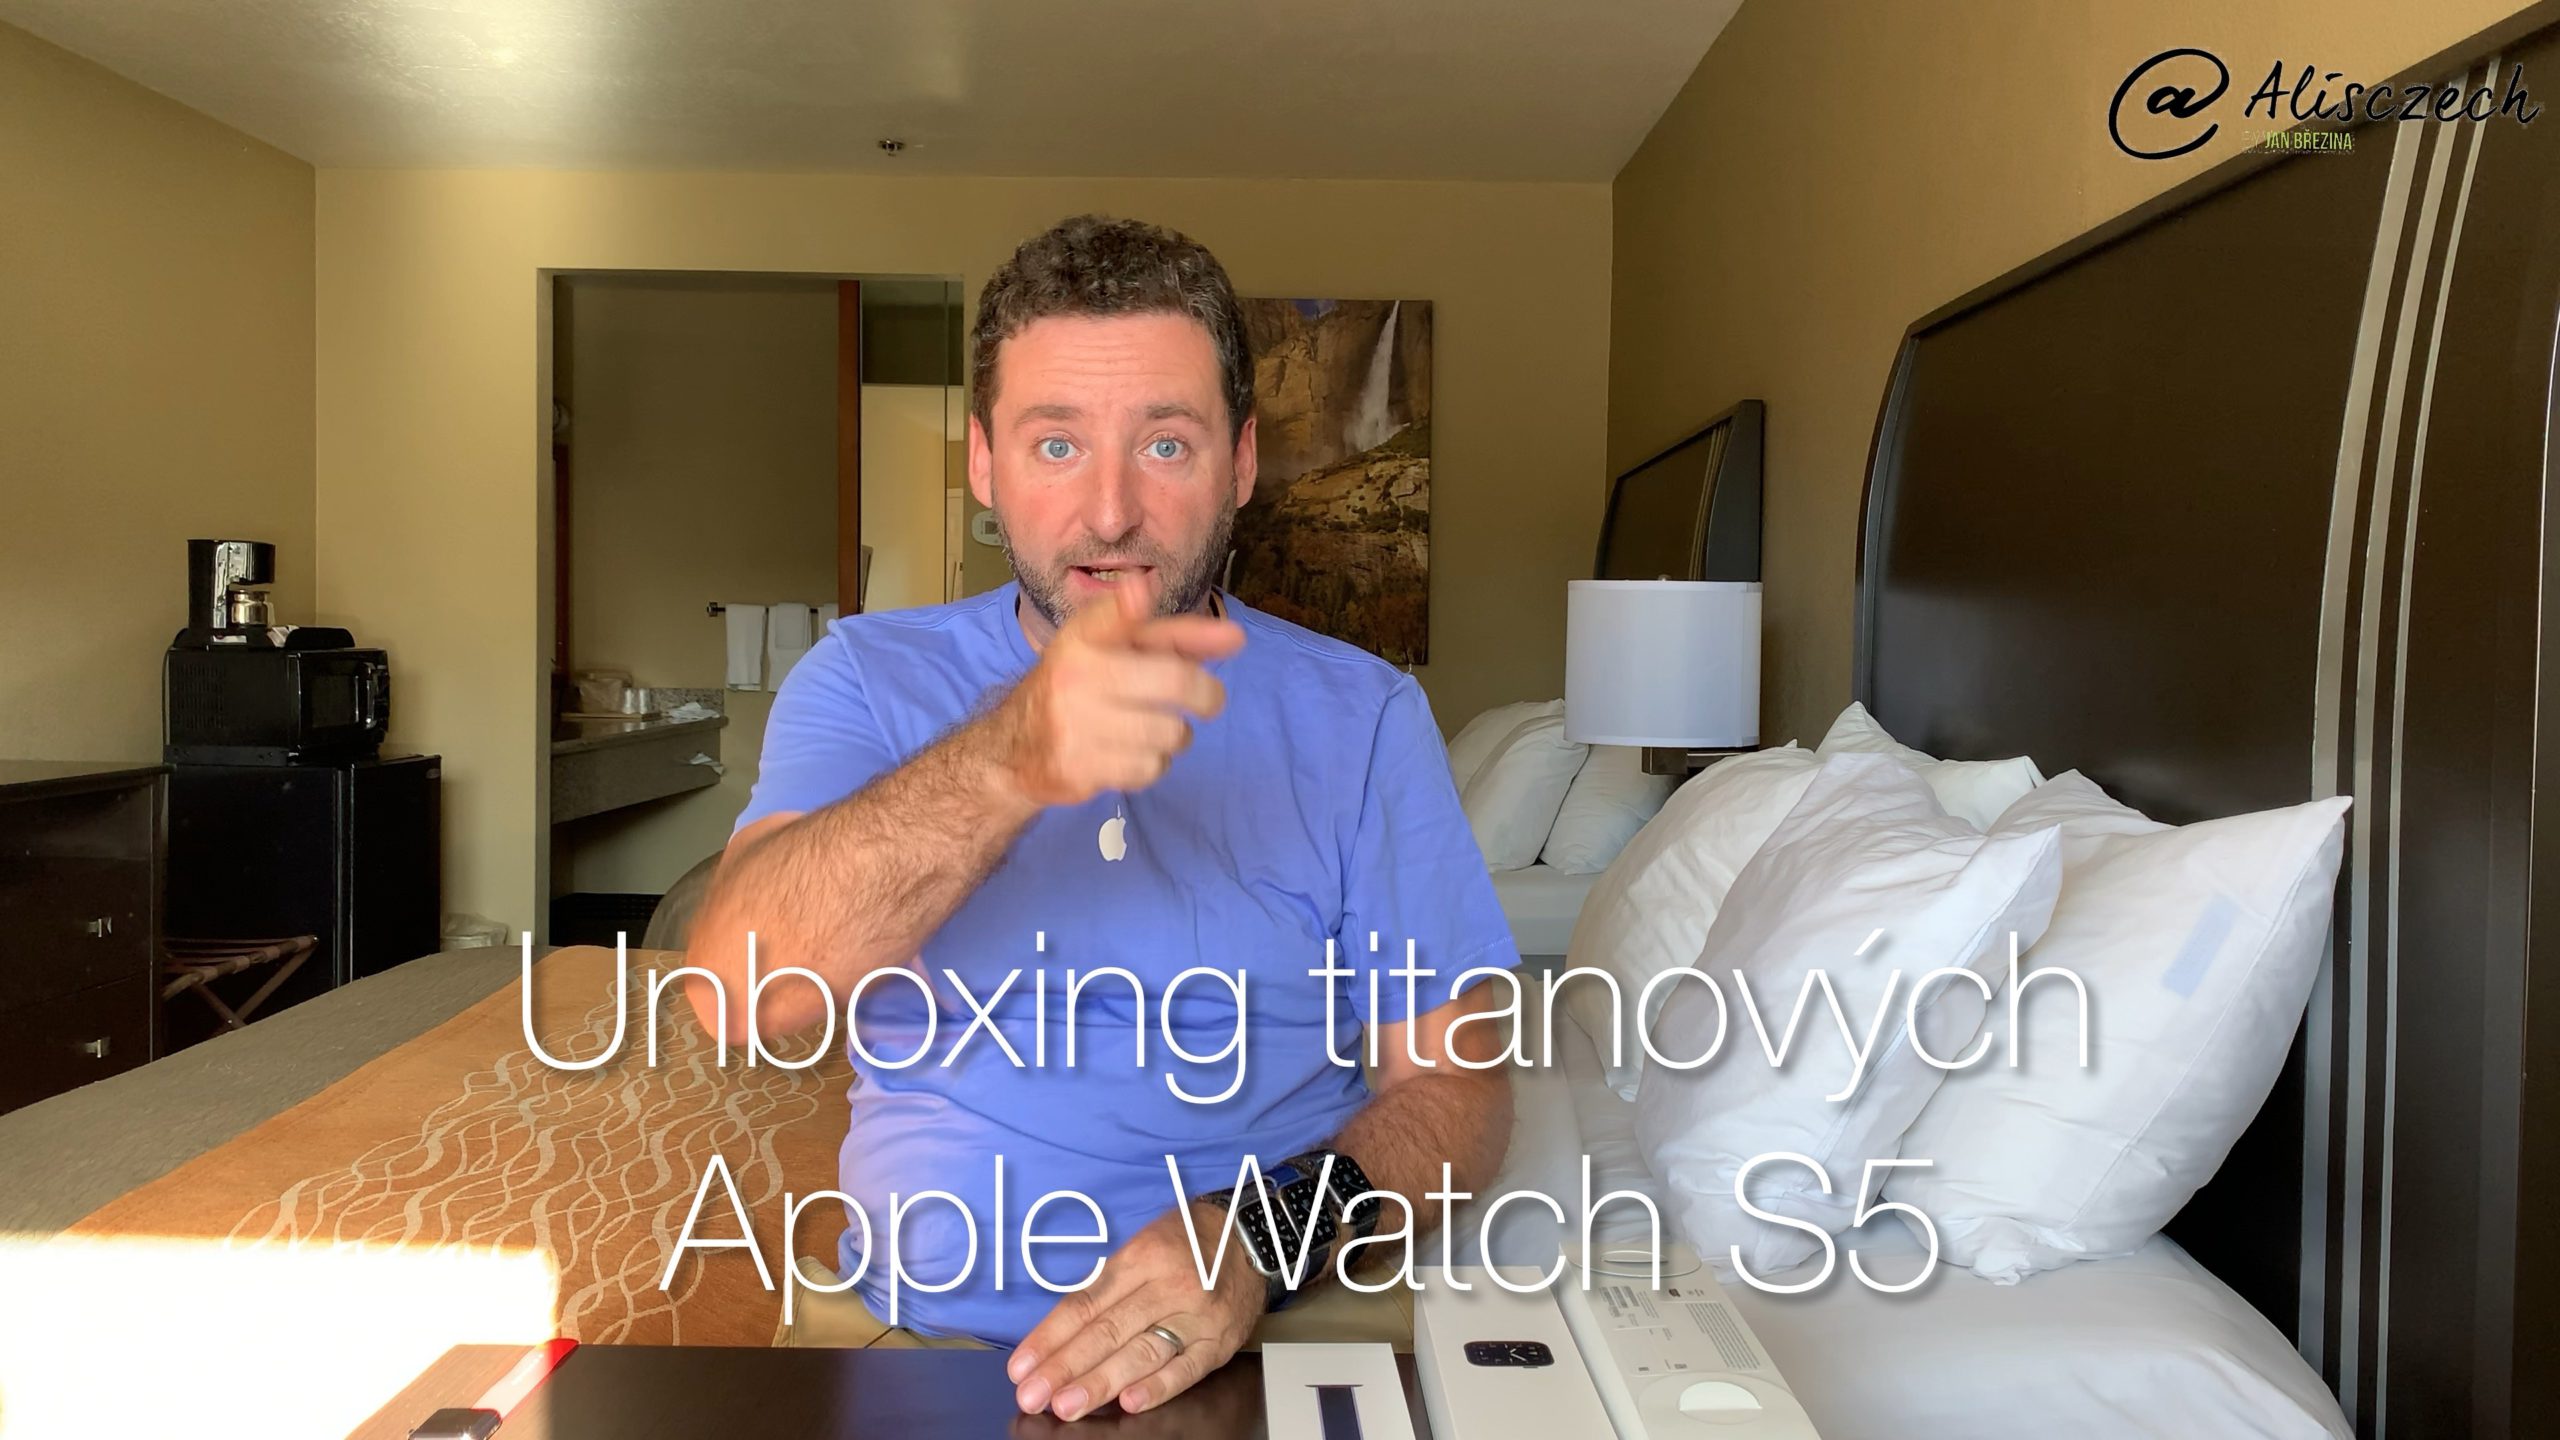 Unboxing titanových Apple Watch 5